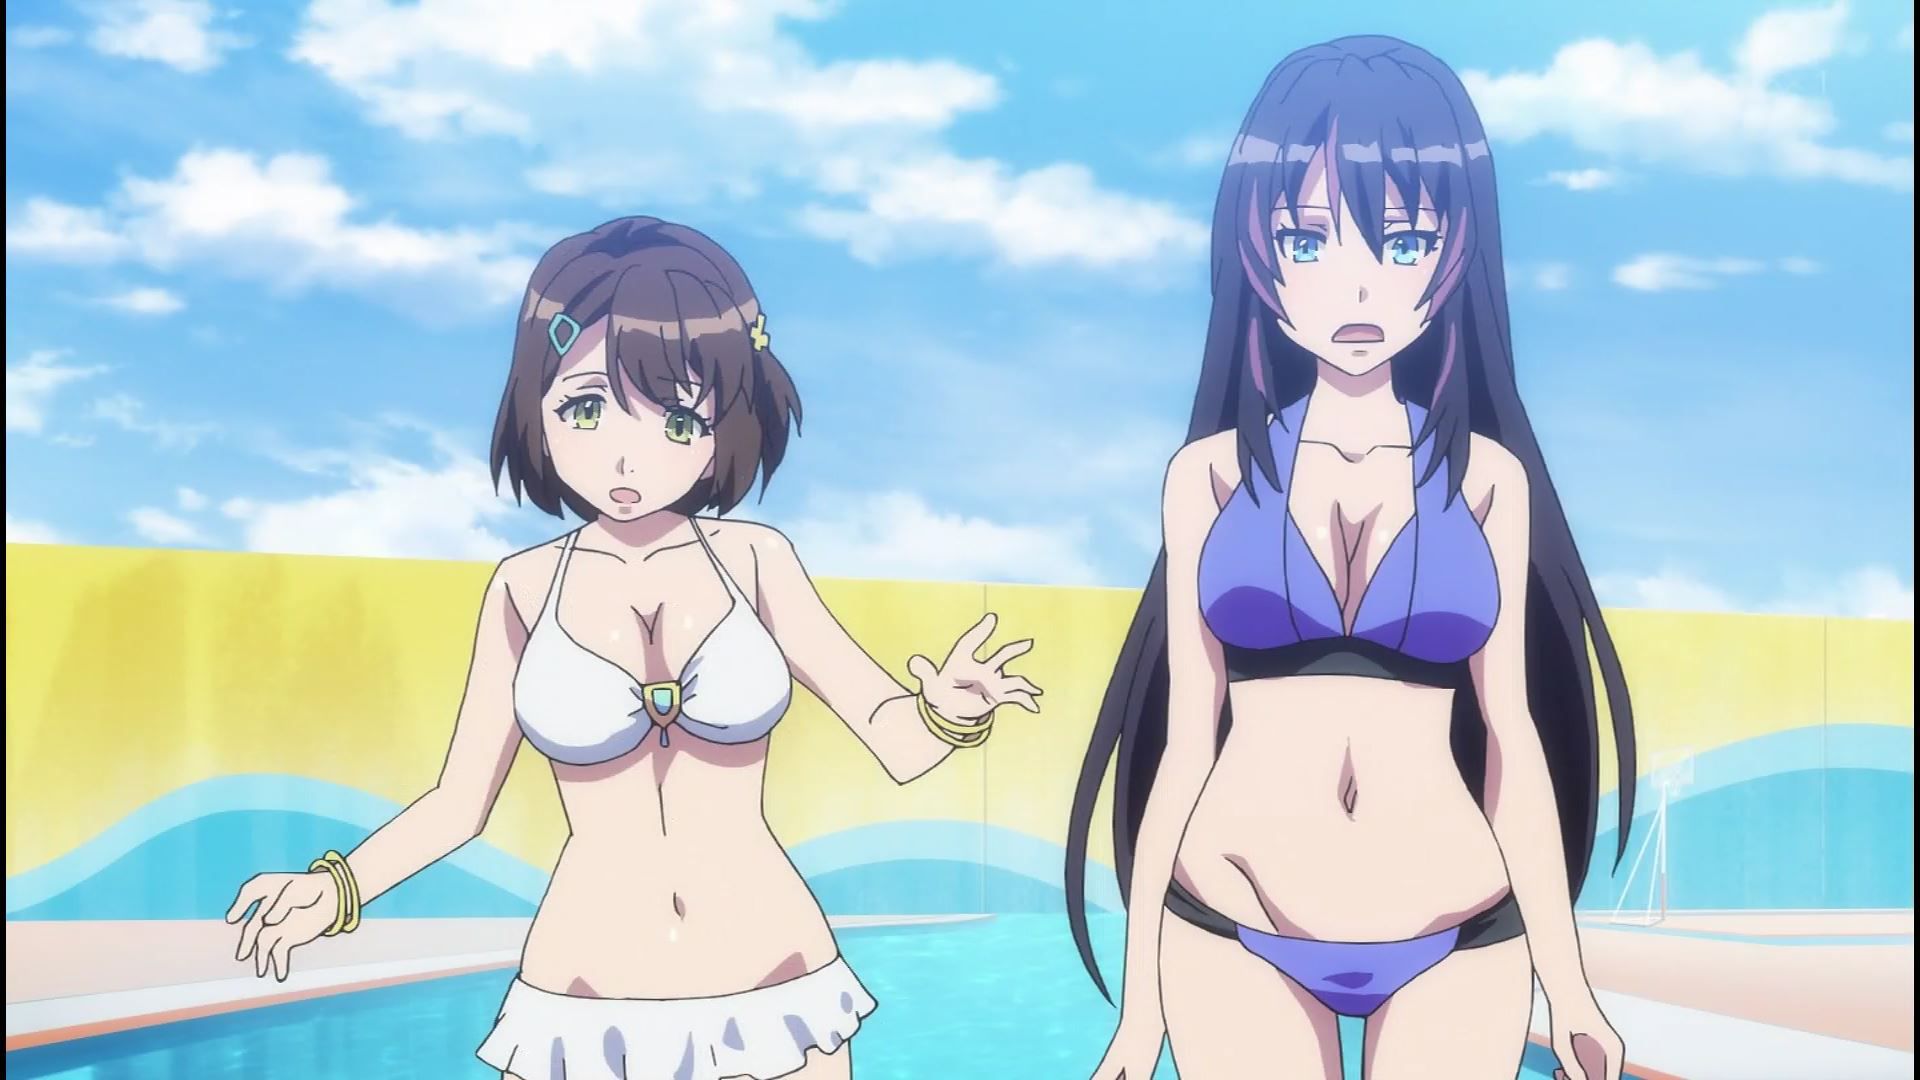 Anime [Kandagawa JETGIRLS] 6 episodes, such as girls' very cute swimsuit and naked! 16